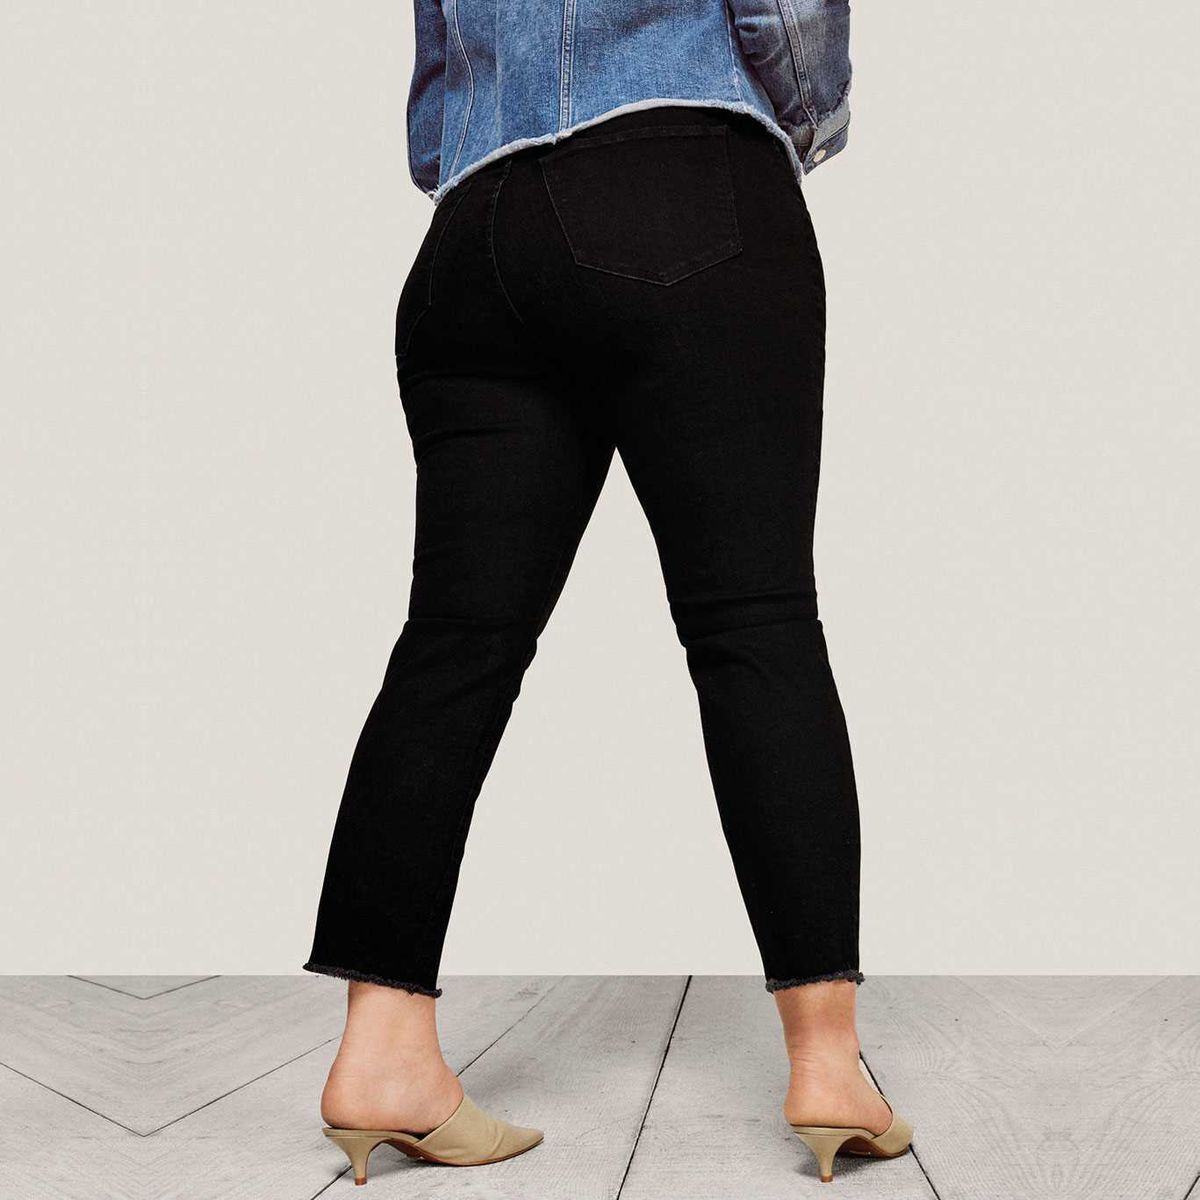 A model wearing black straight leg jeans and a denim jacket